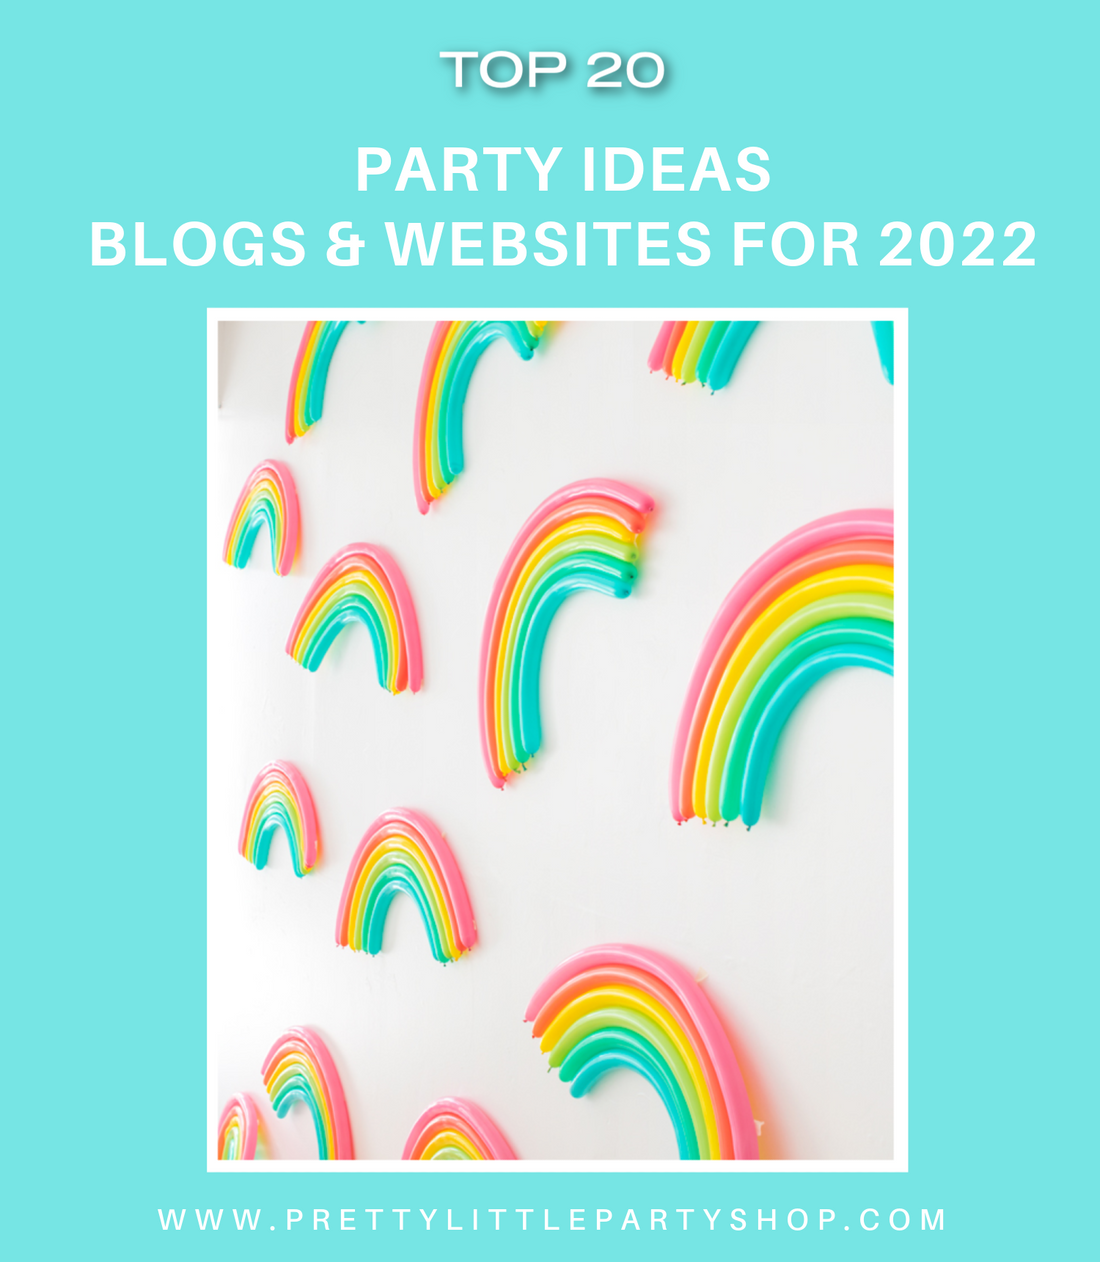 The Best Party Ideas Blogs and Websites 2022